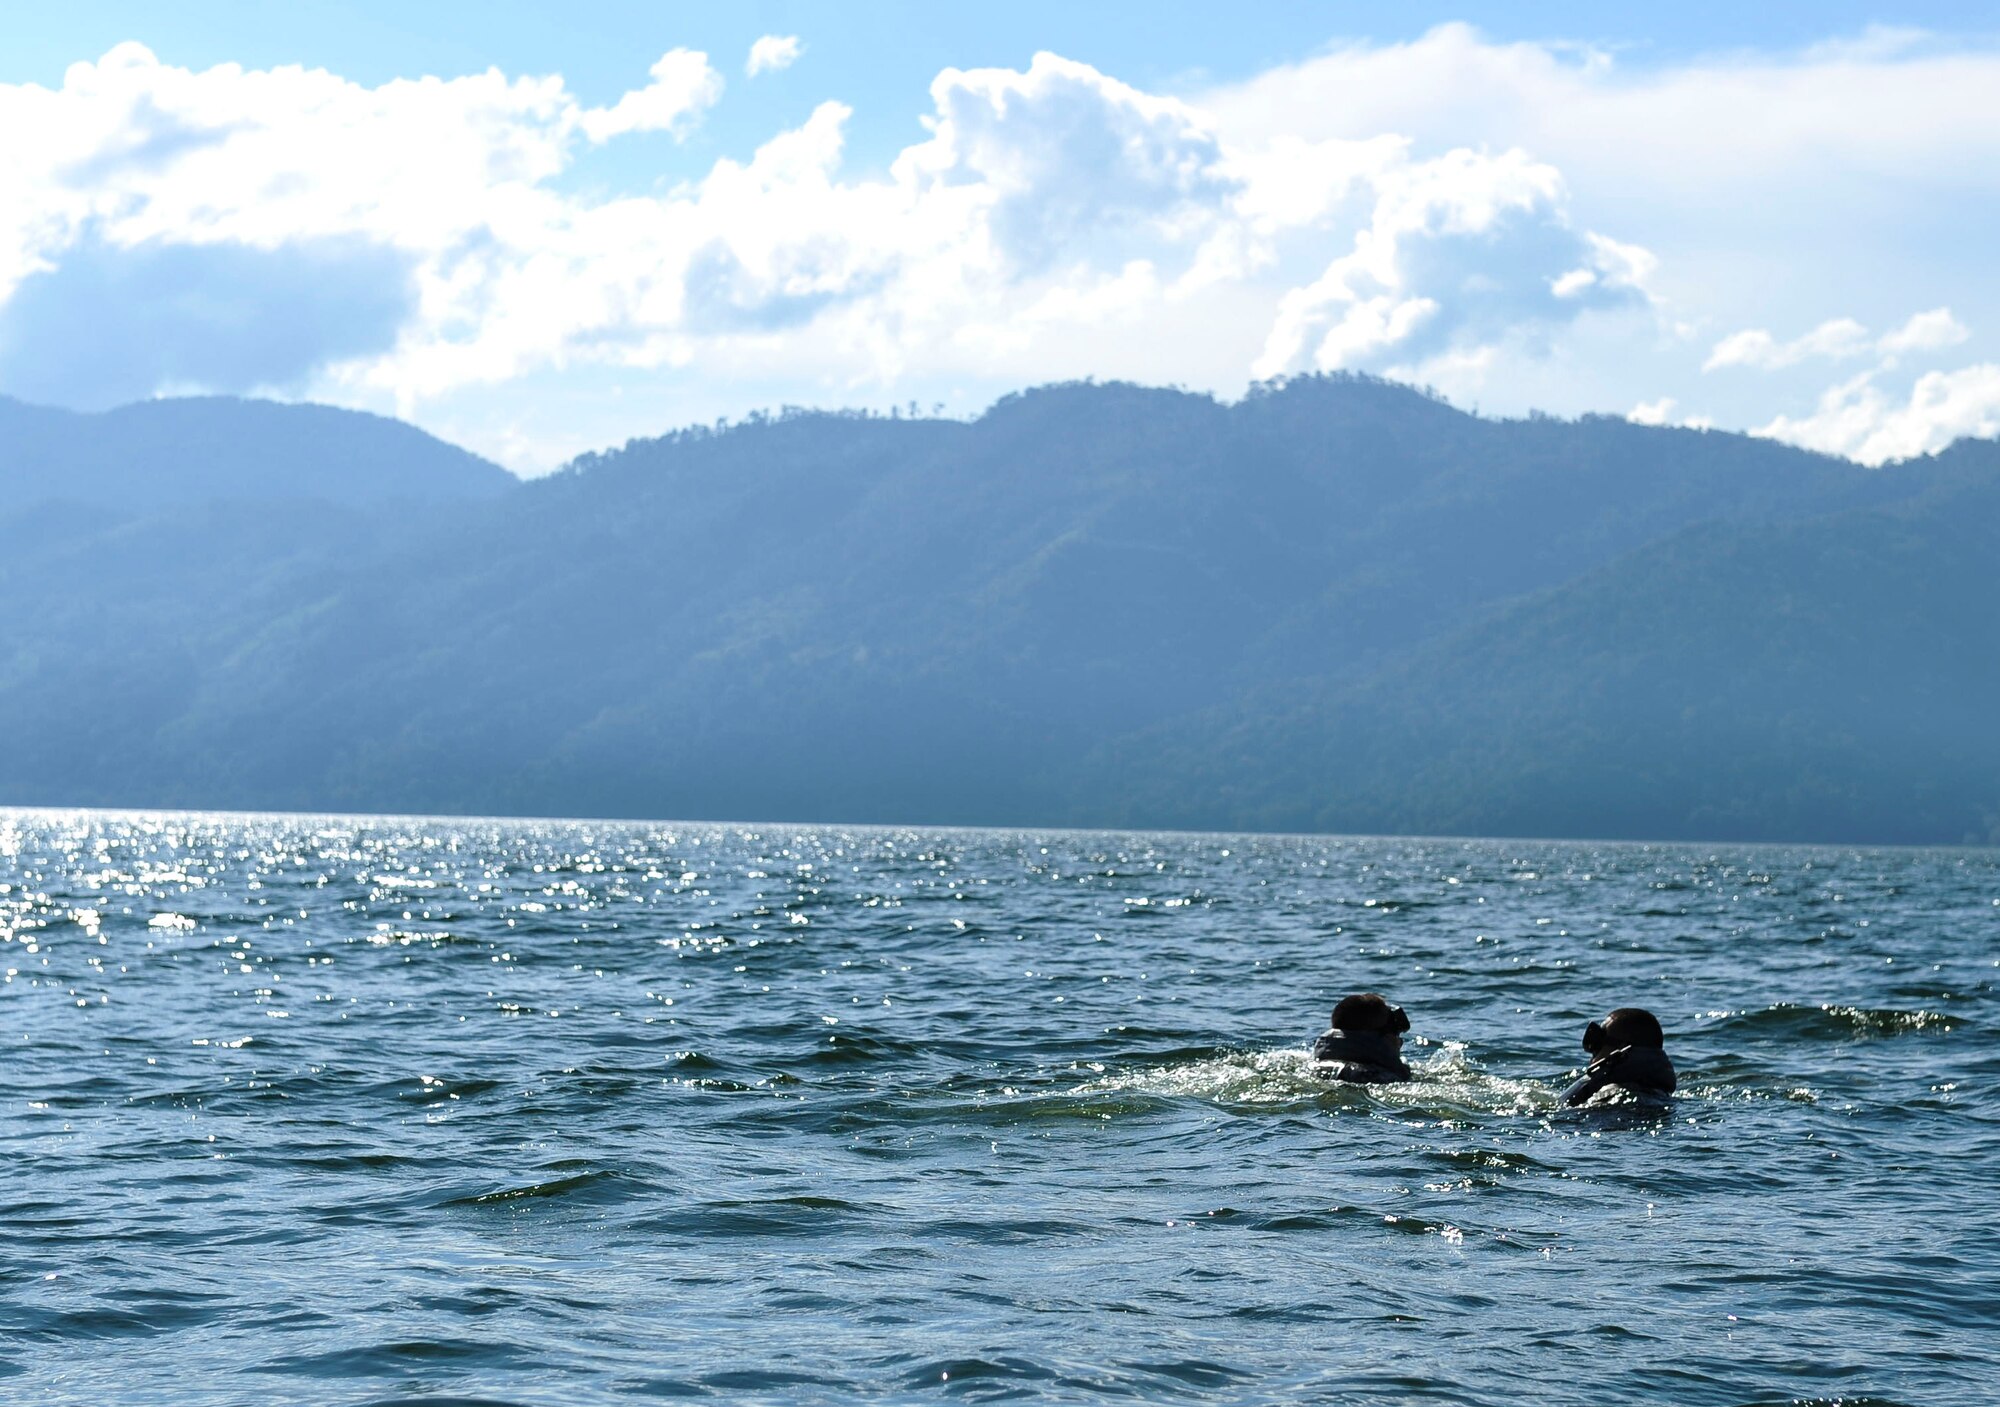 Two U.S. Army Special Operations members swim out to the middle of Lake Yojoa to wait for a UH-60 Black Hawk helicopter assigned to the 1-228th Aviation Regiment to recover them during an over-water hoist training event in Honduras, Jan. 22, 2015.   The 1-228th Avn. Reg. partnered with U.S. Army Special Operations personnel to practice recovering live personnel. The overwater hoist training was held to ensure members of Joint Task Force-Bravo are planning and preparing for crisis and contingency response, as well as countering transnational organized crime, and counterterrorism operations as part of U.S. Southern Command’s mission. Contingency planning prepares the command for various scenarios that pose the greatest probability of challenging our regional partners or threatening our national interests. (U.S. Air Force photo/Tech. Sgt. Keola Soon)